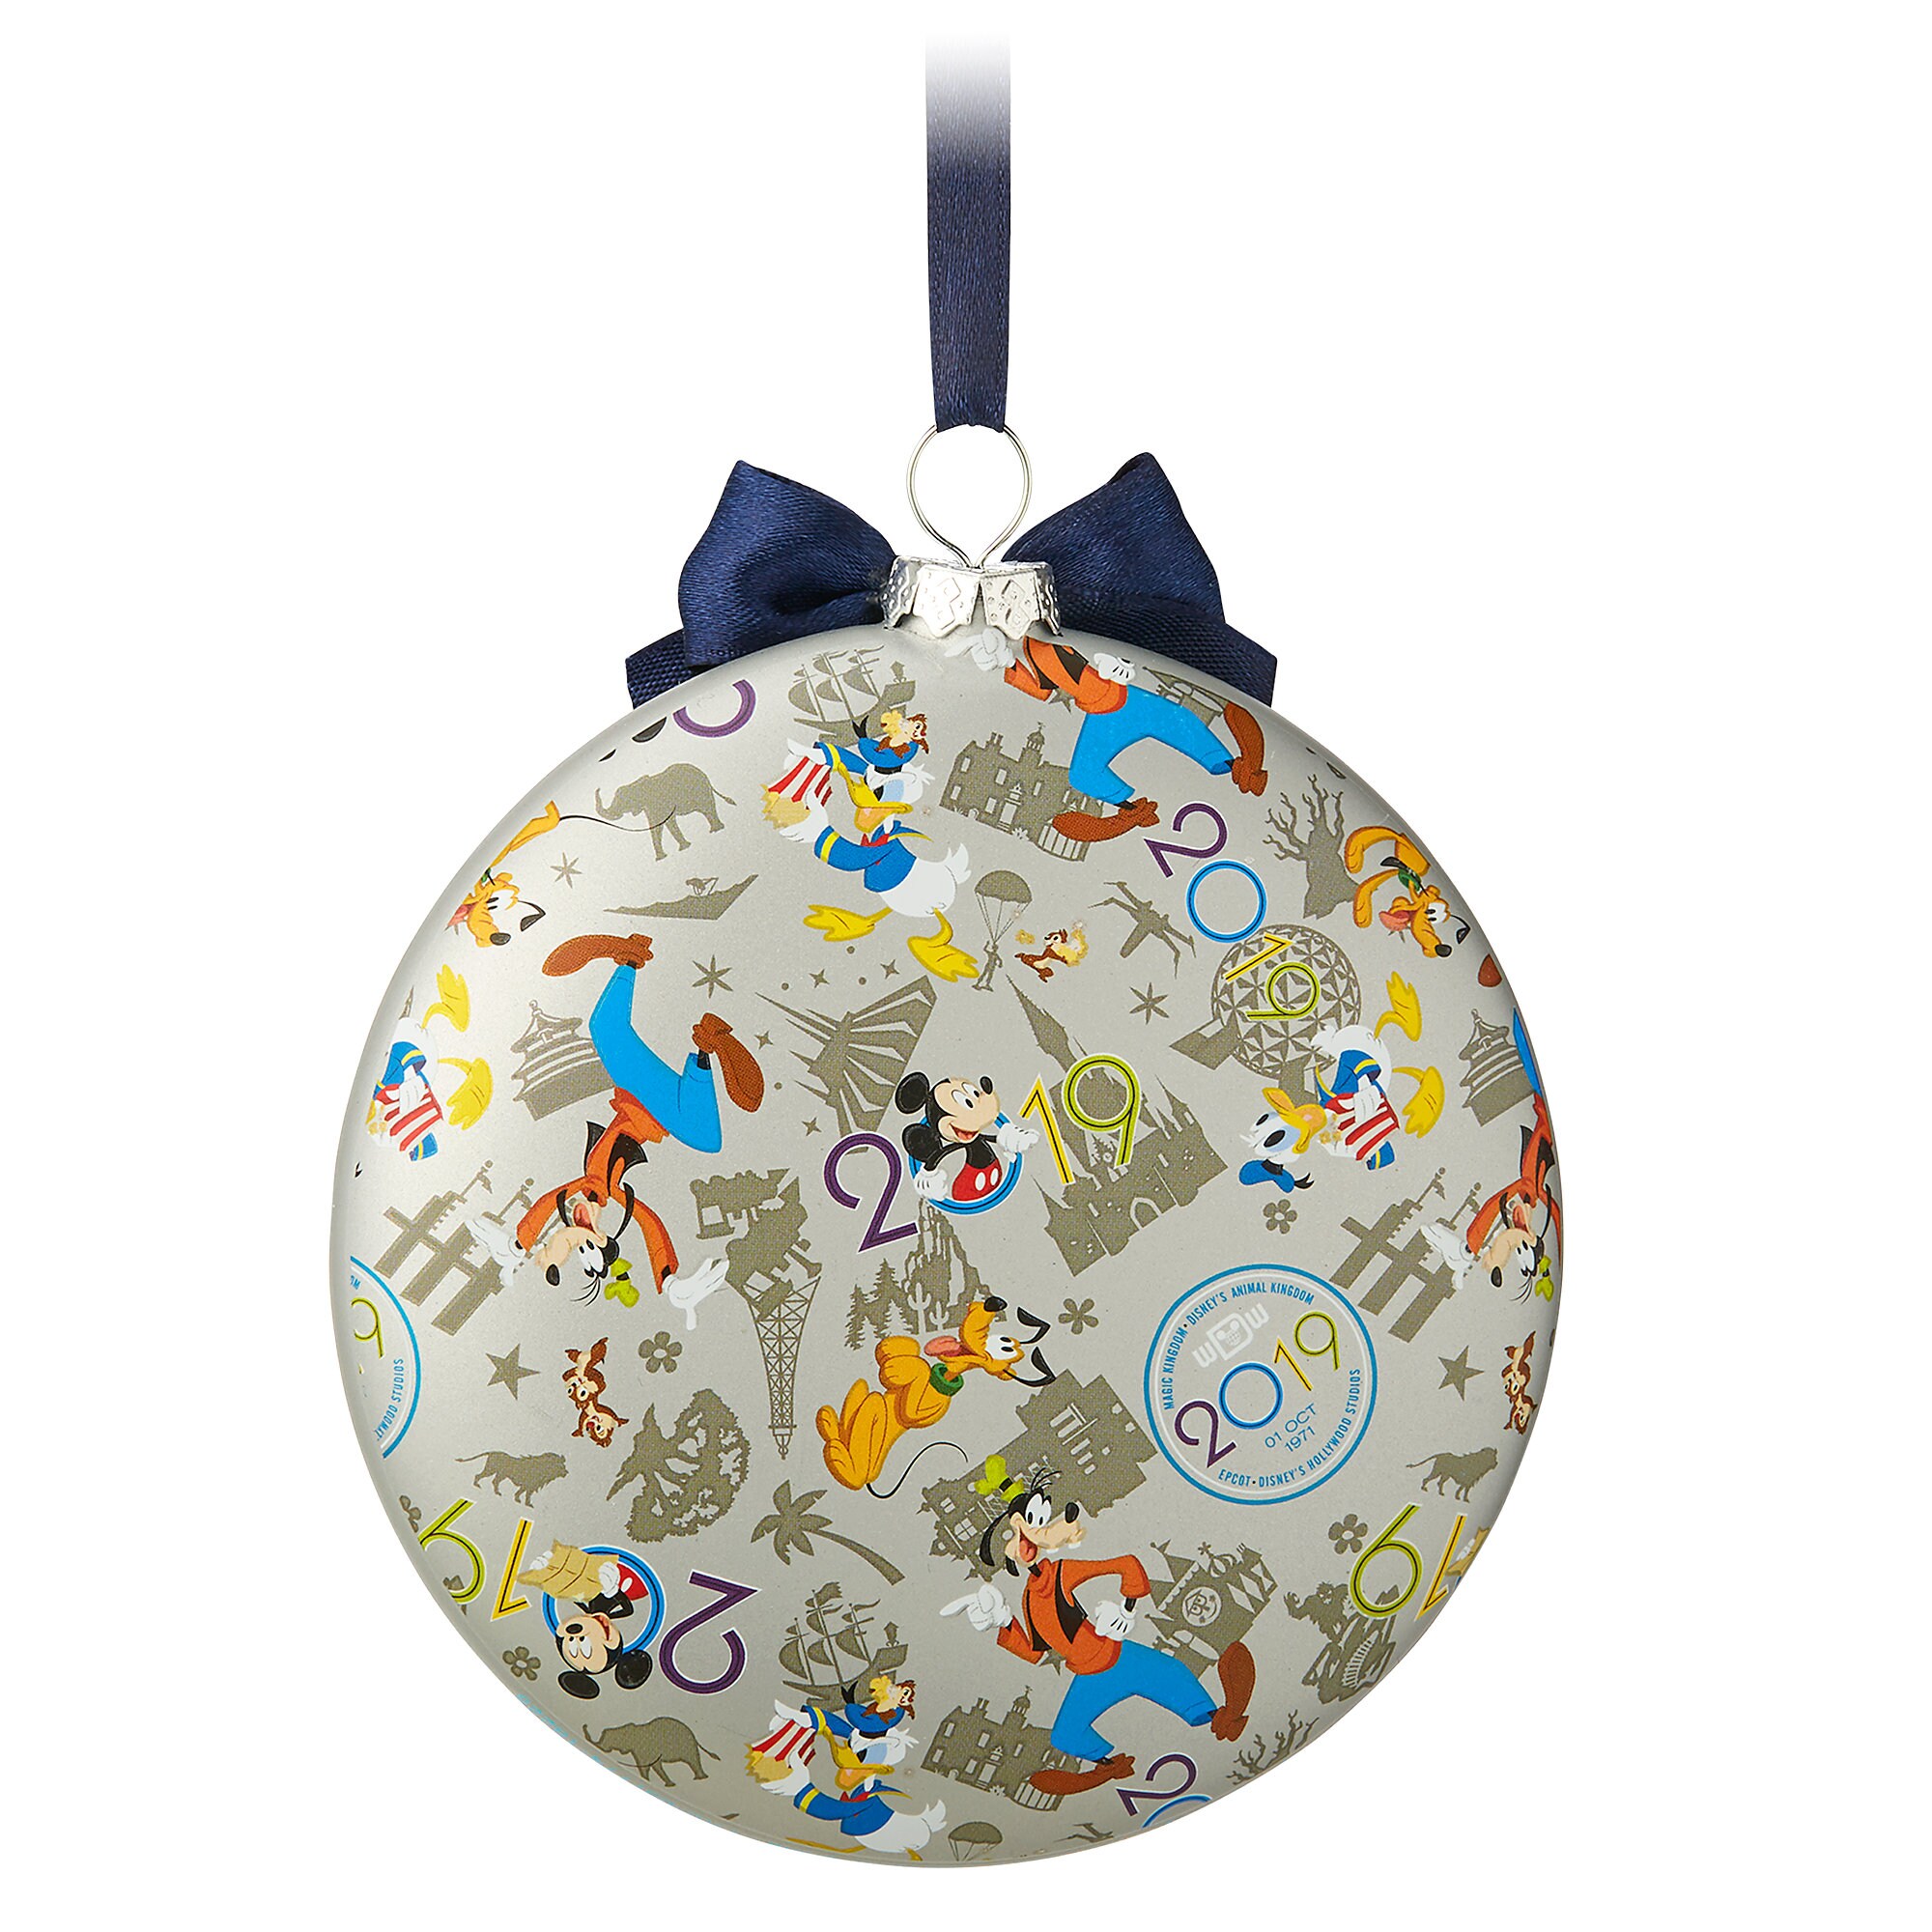 Mickey Mouse and Friends Glass Disk Ornament - Walt Disney World 2019